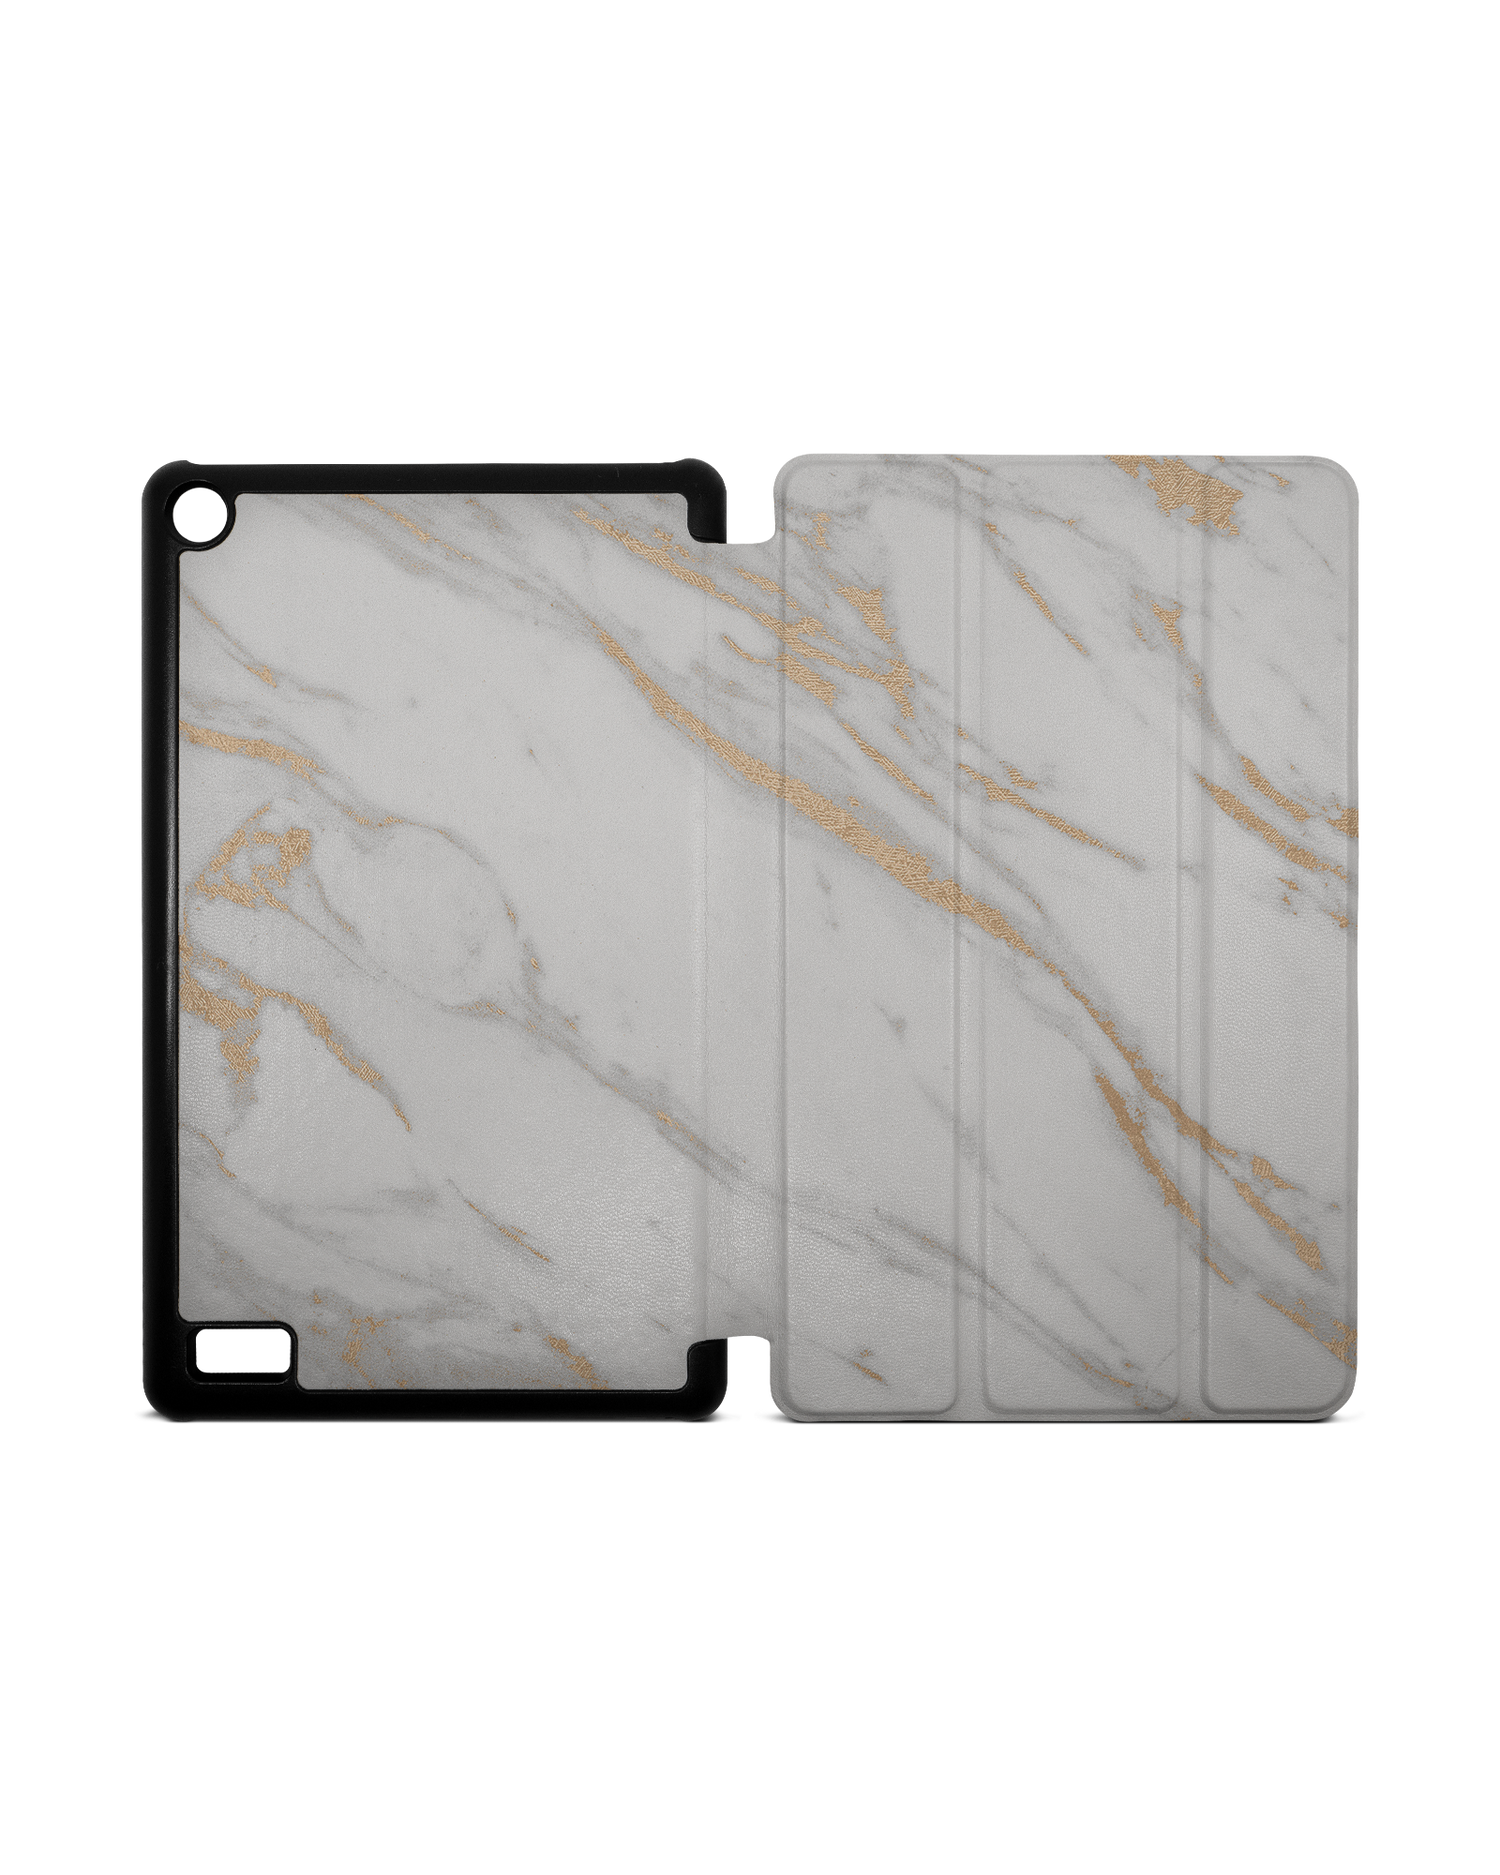 Gold Marble Elegance Tablet Smart Case for Amazon Fire 7: Opened